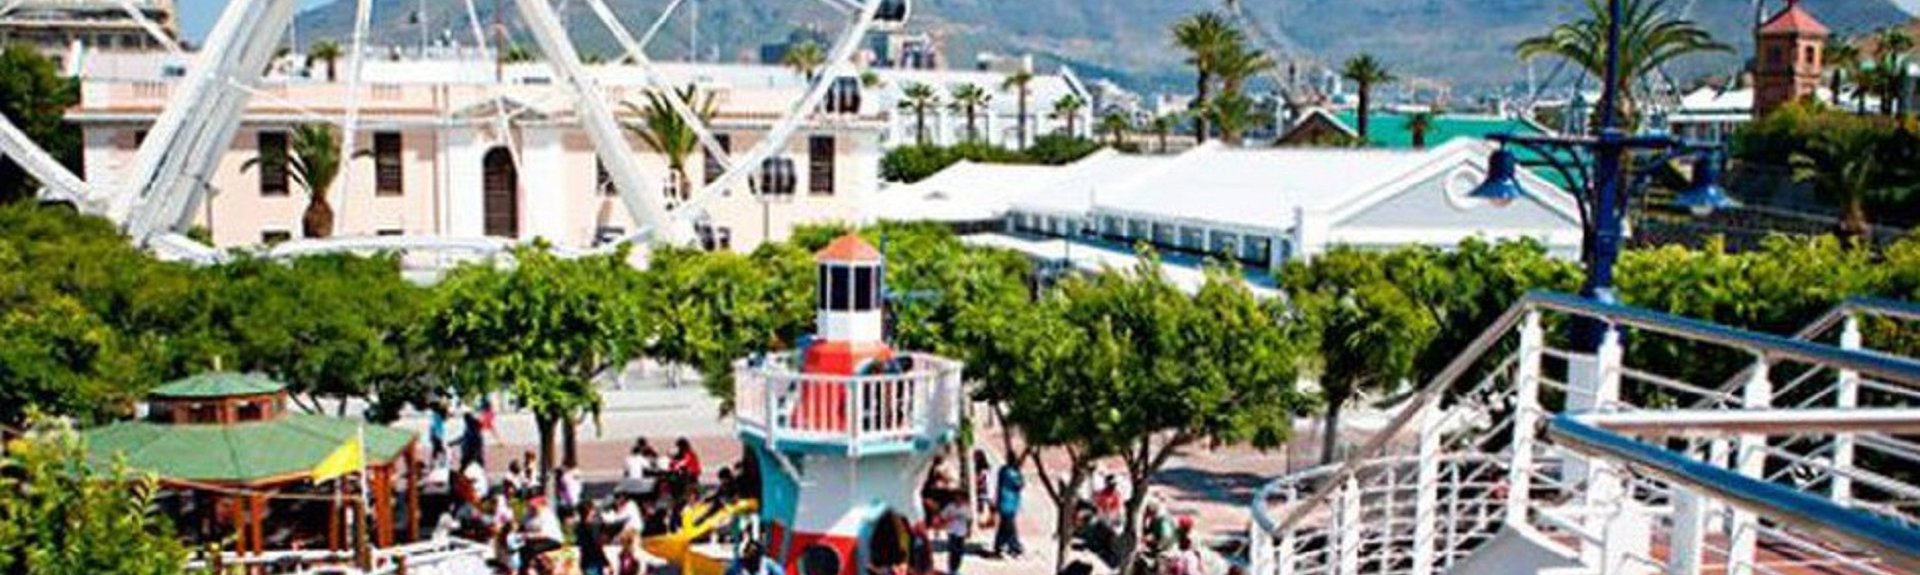 V&A Waterfront | Cape Town | Things to do With kids